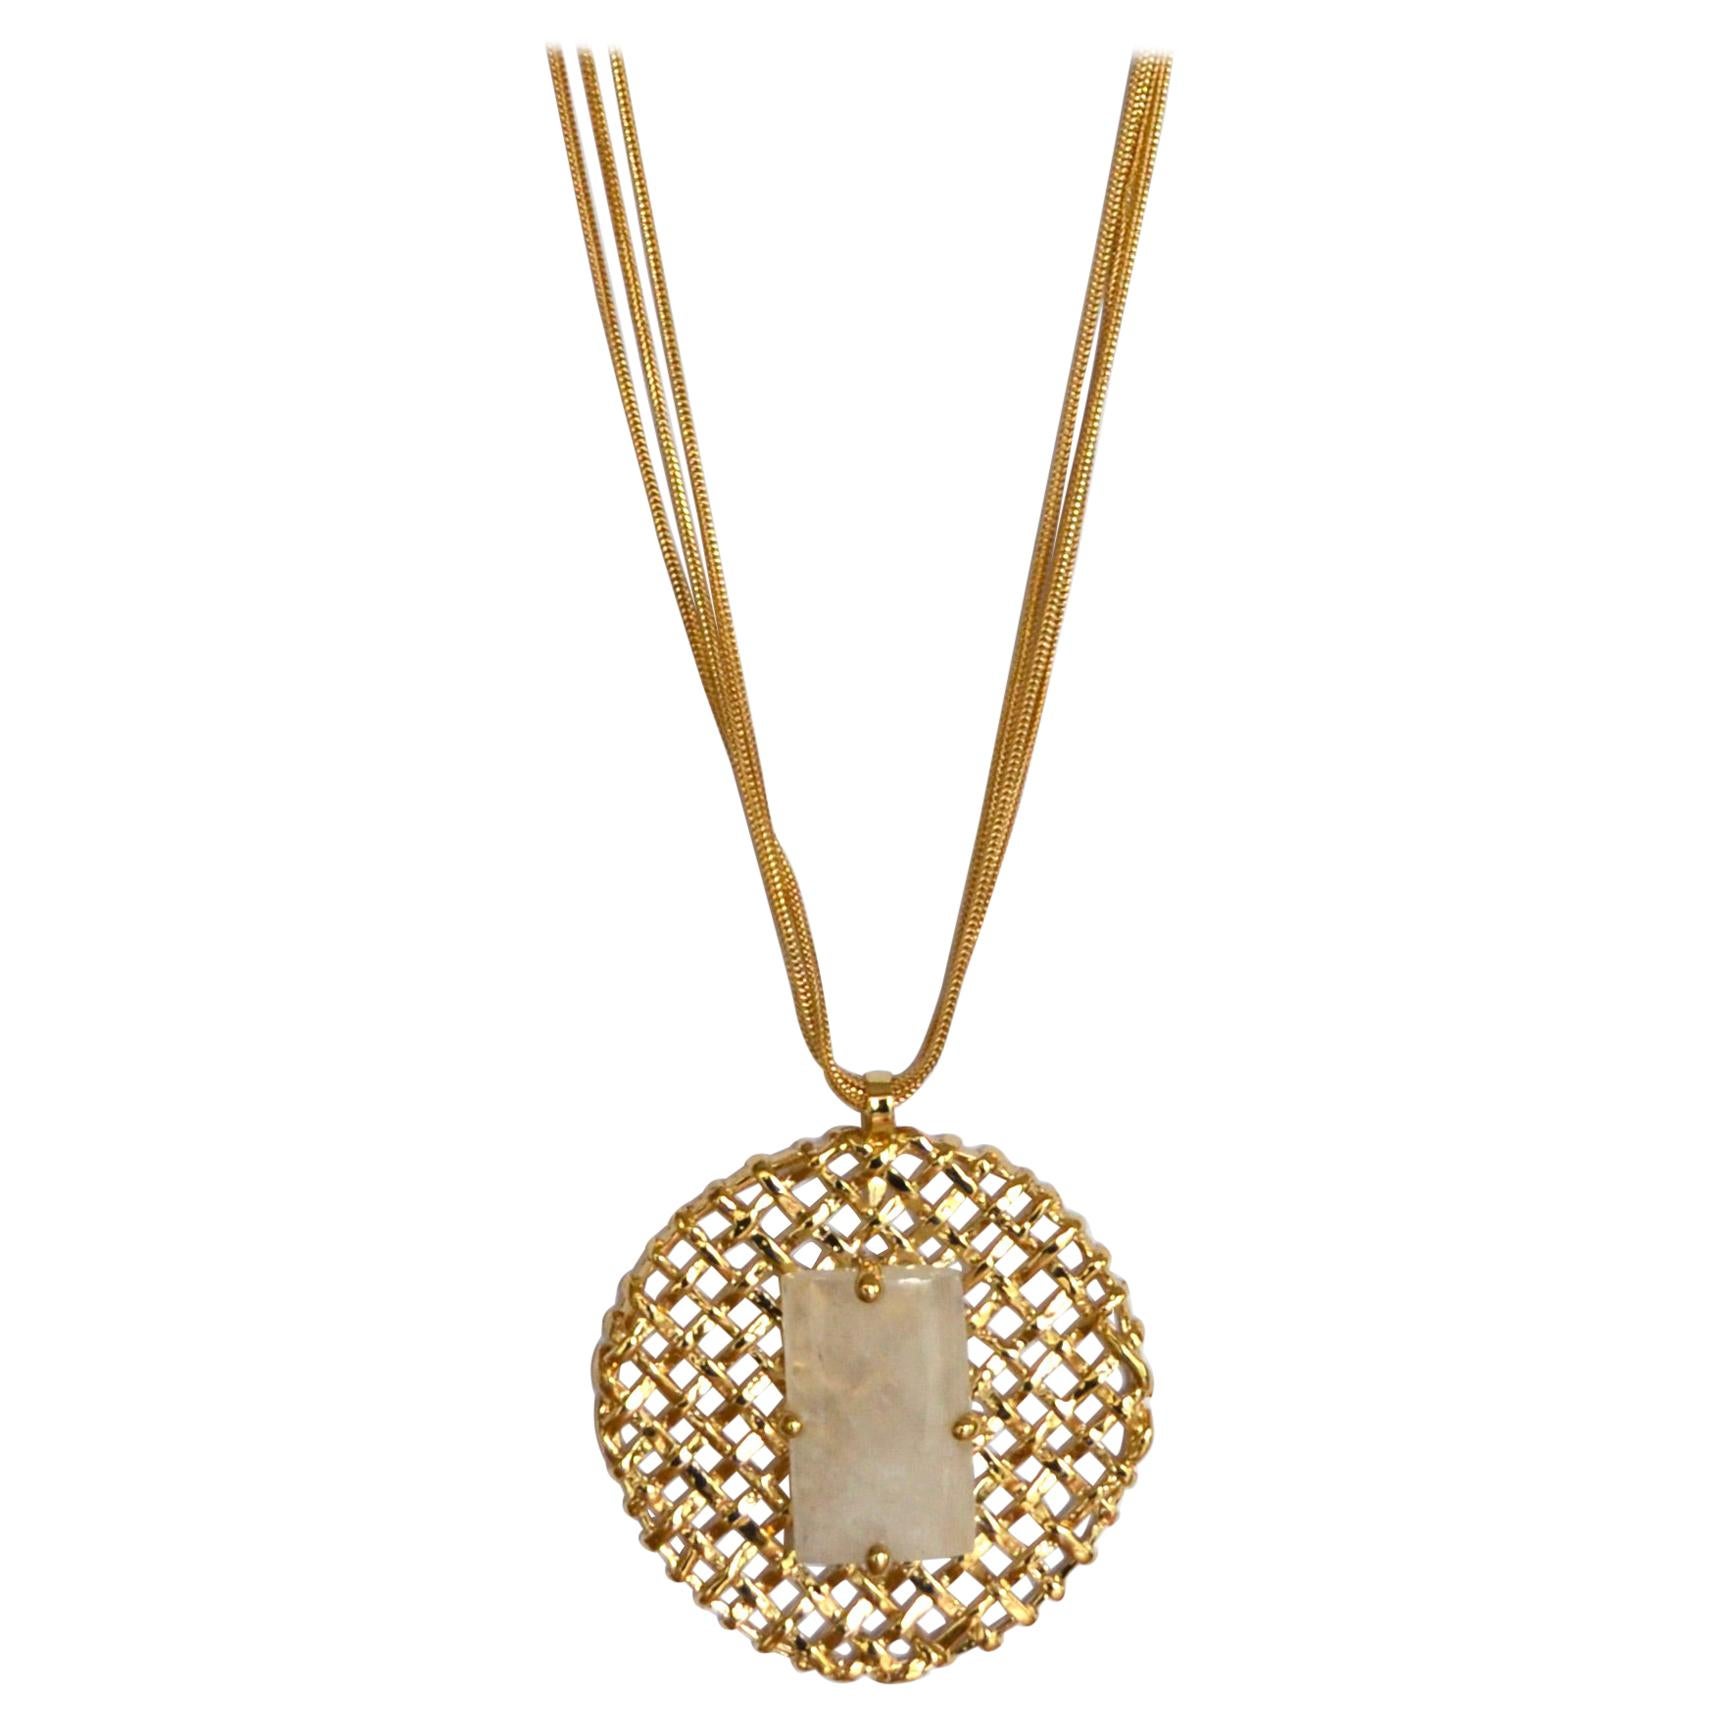 24-carat Gilded Bronze Pendant with Rock Crystal on MultiChain